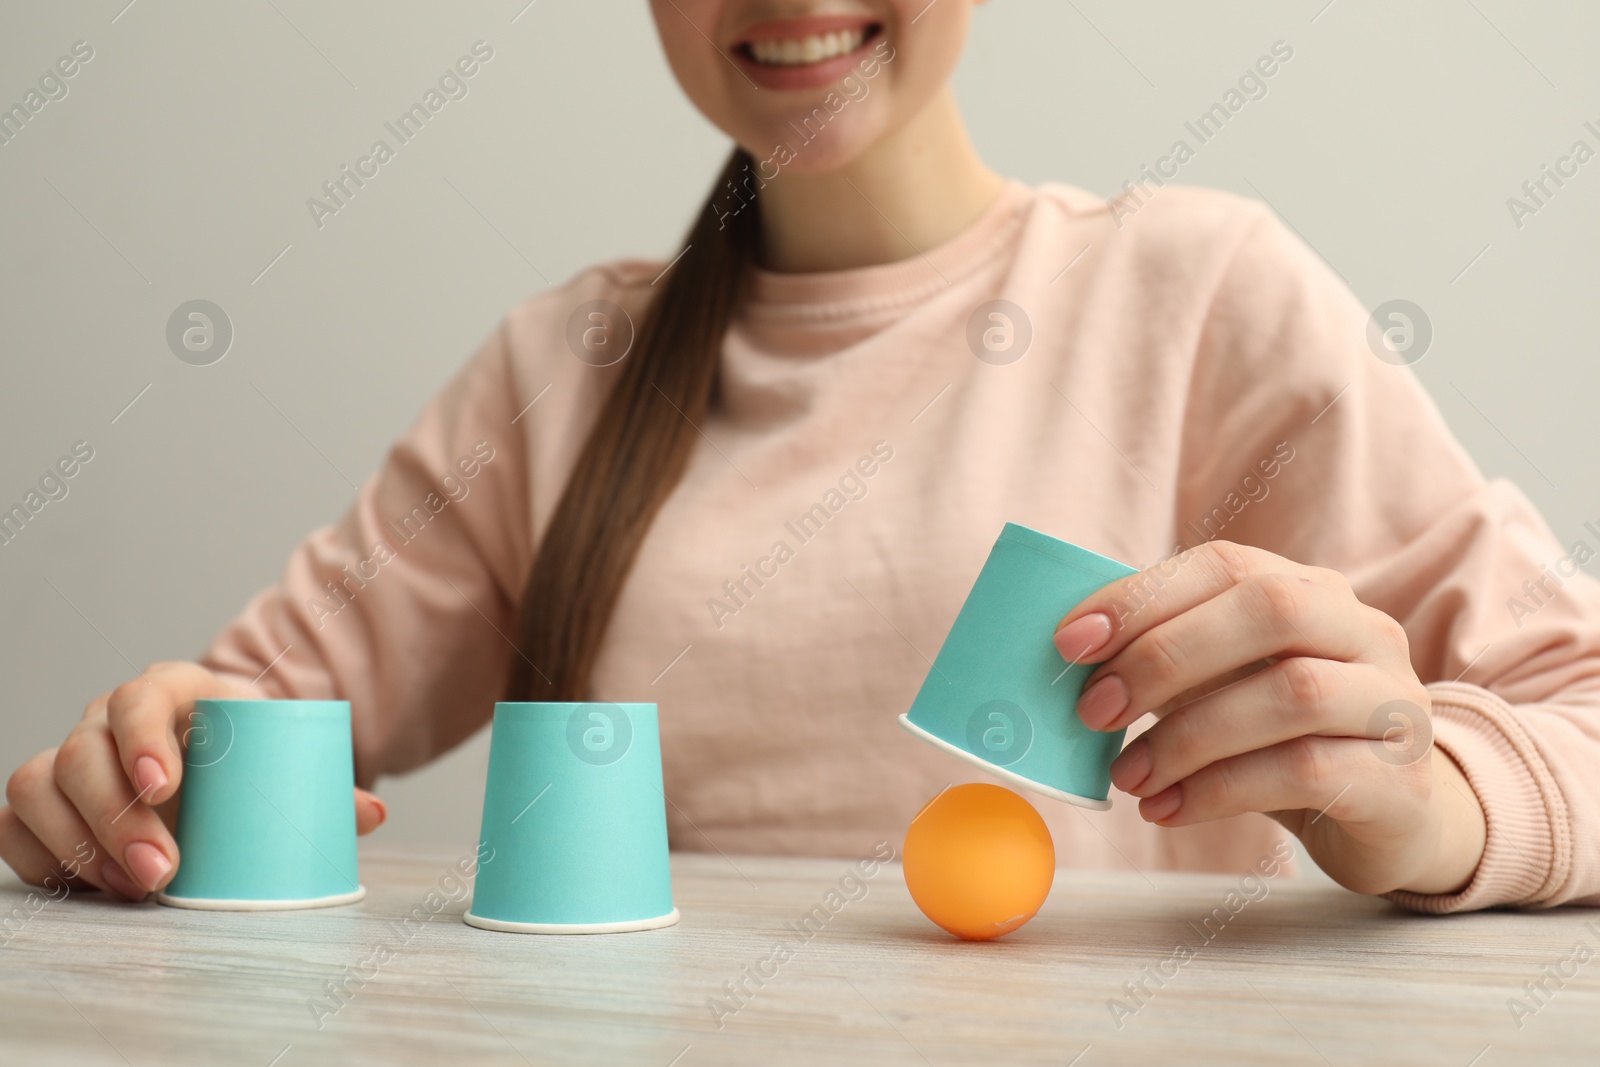 Photo of Shell game. Woman showing ball under cup at wooden table, closeup